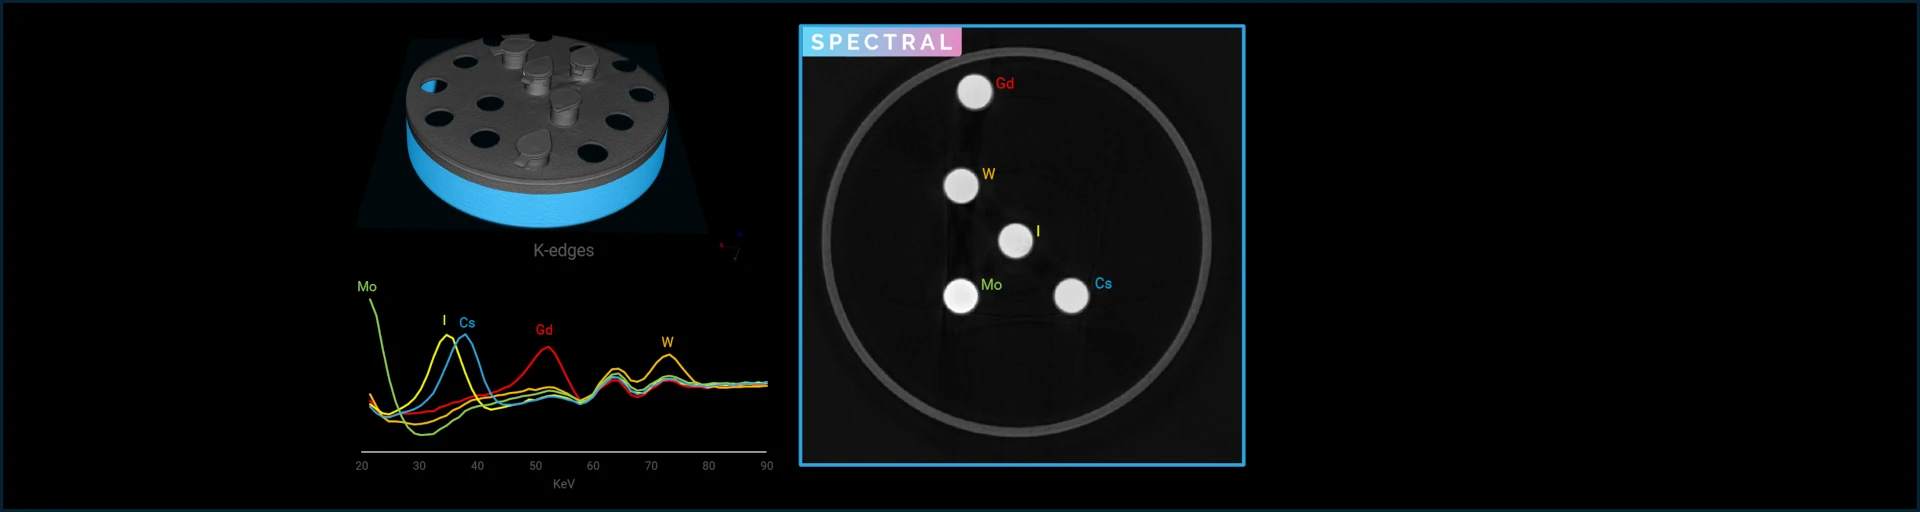 TESCAN spectral CT for materials science: Moving beyond K-edge imaging for material identification